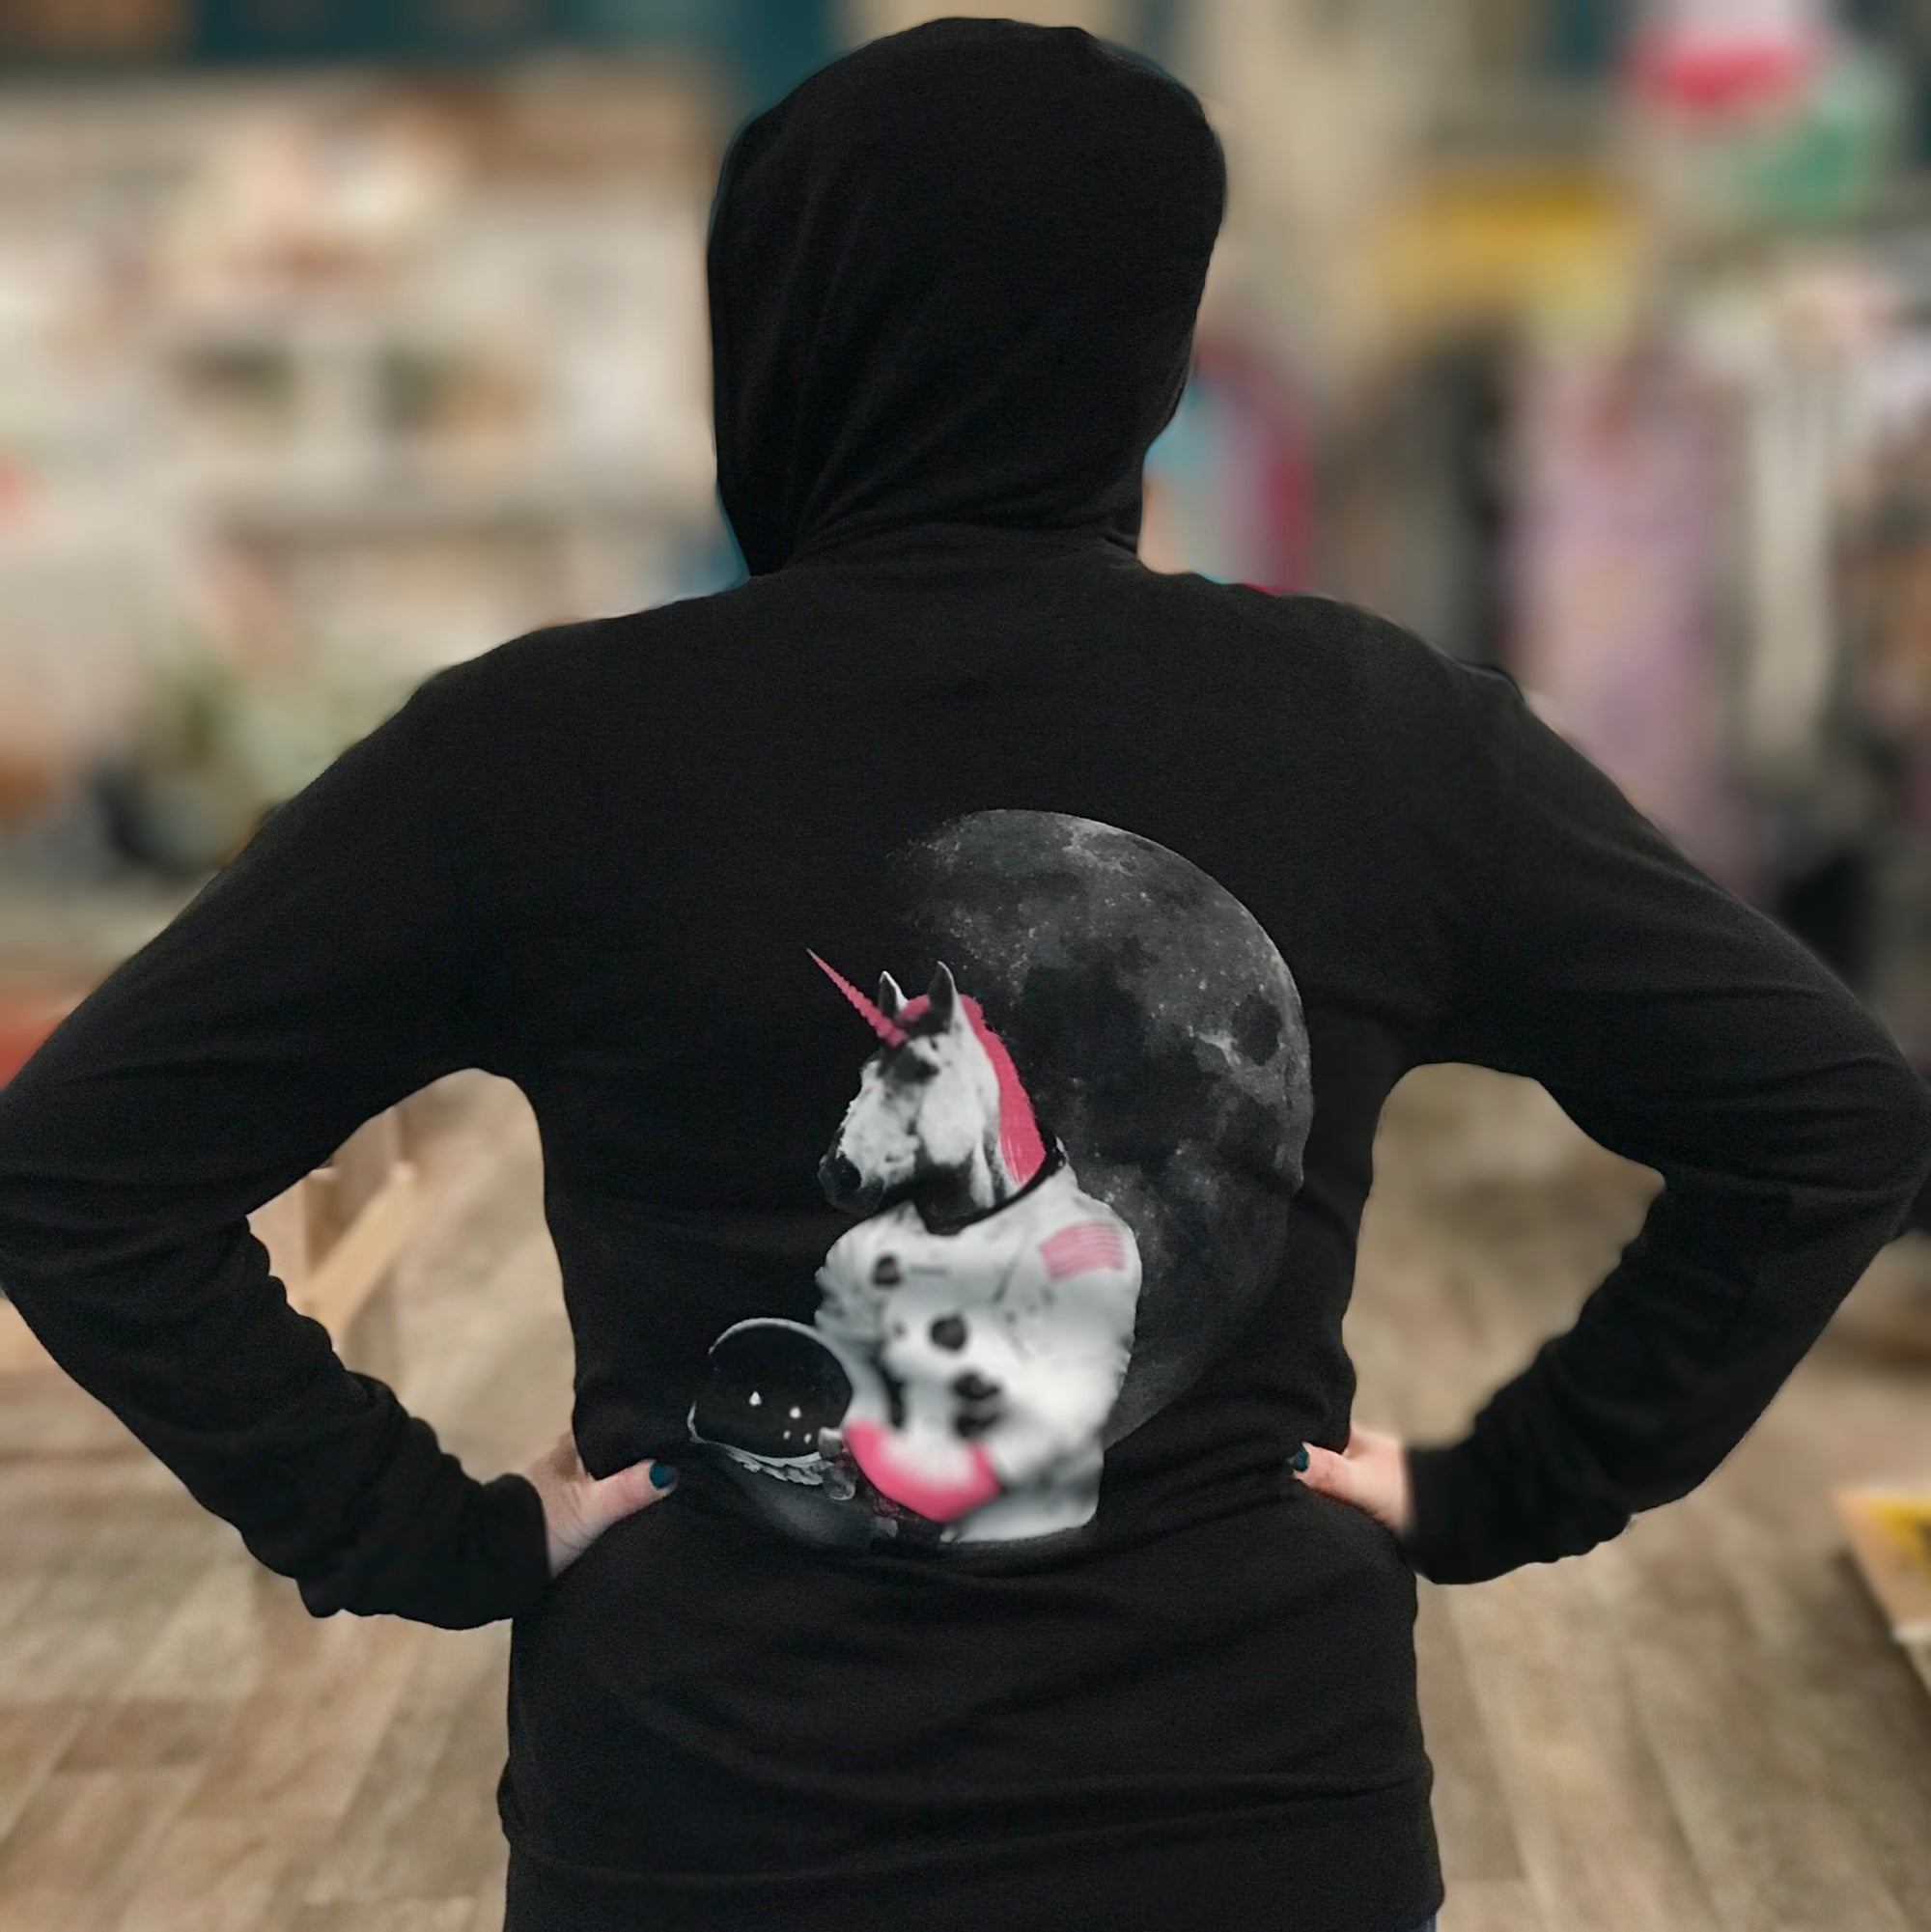 Black hooded sweatshirt with a roller skating unicorn astronaut screenprinted on the back in white and hot pink.  A person models with the hood up and their hands on their hips. 